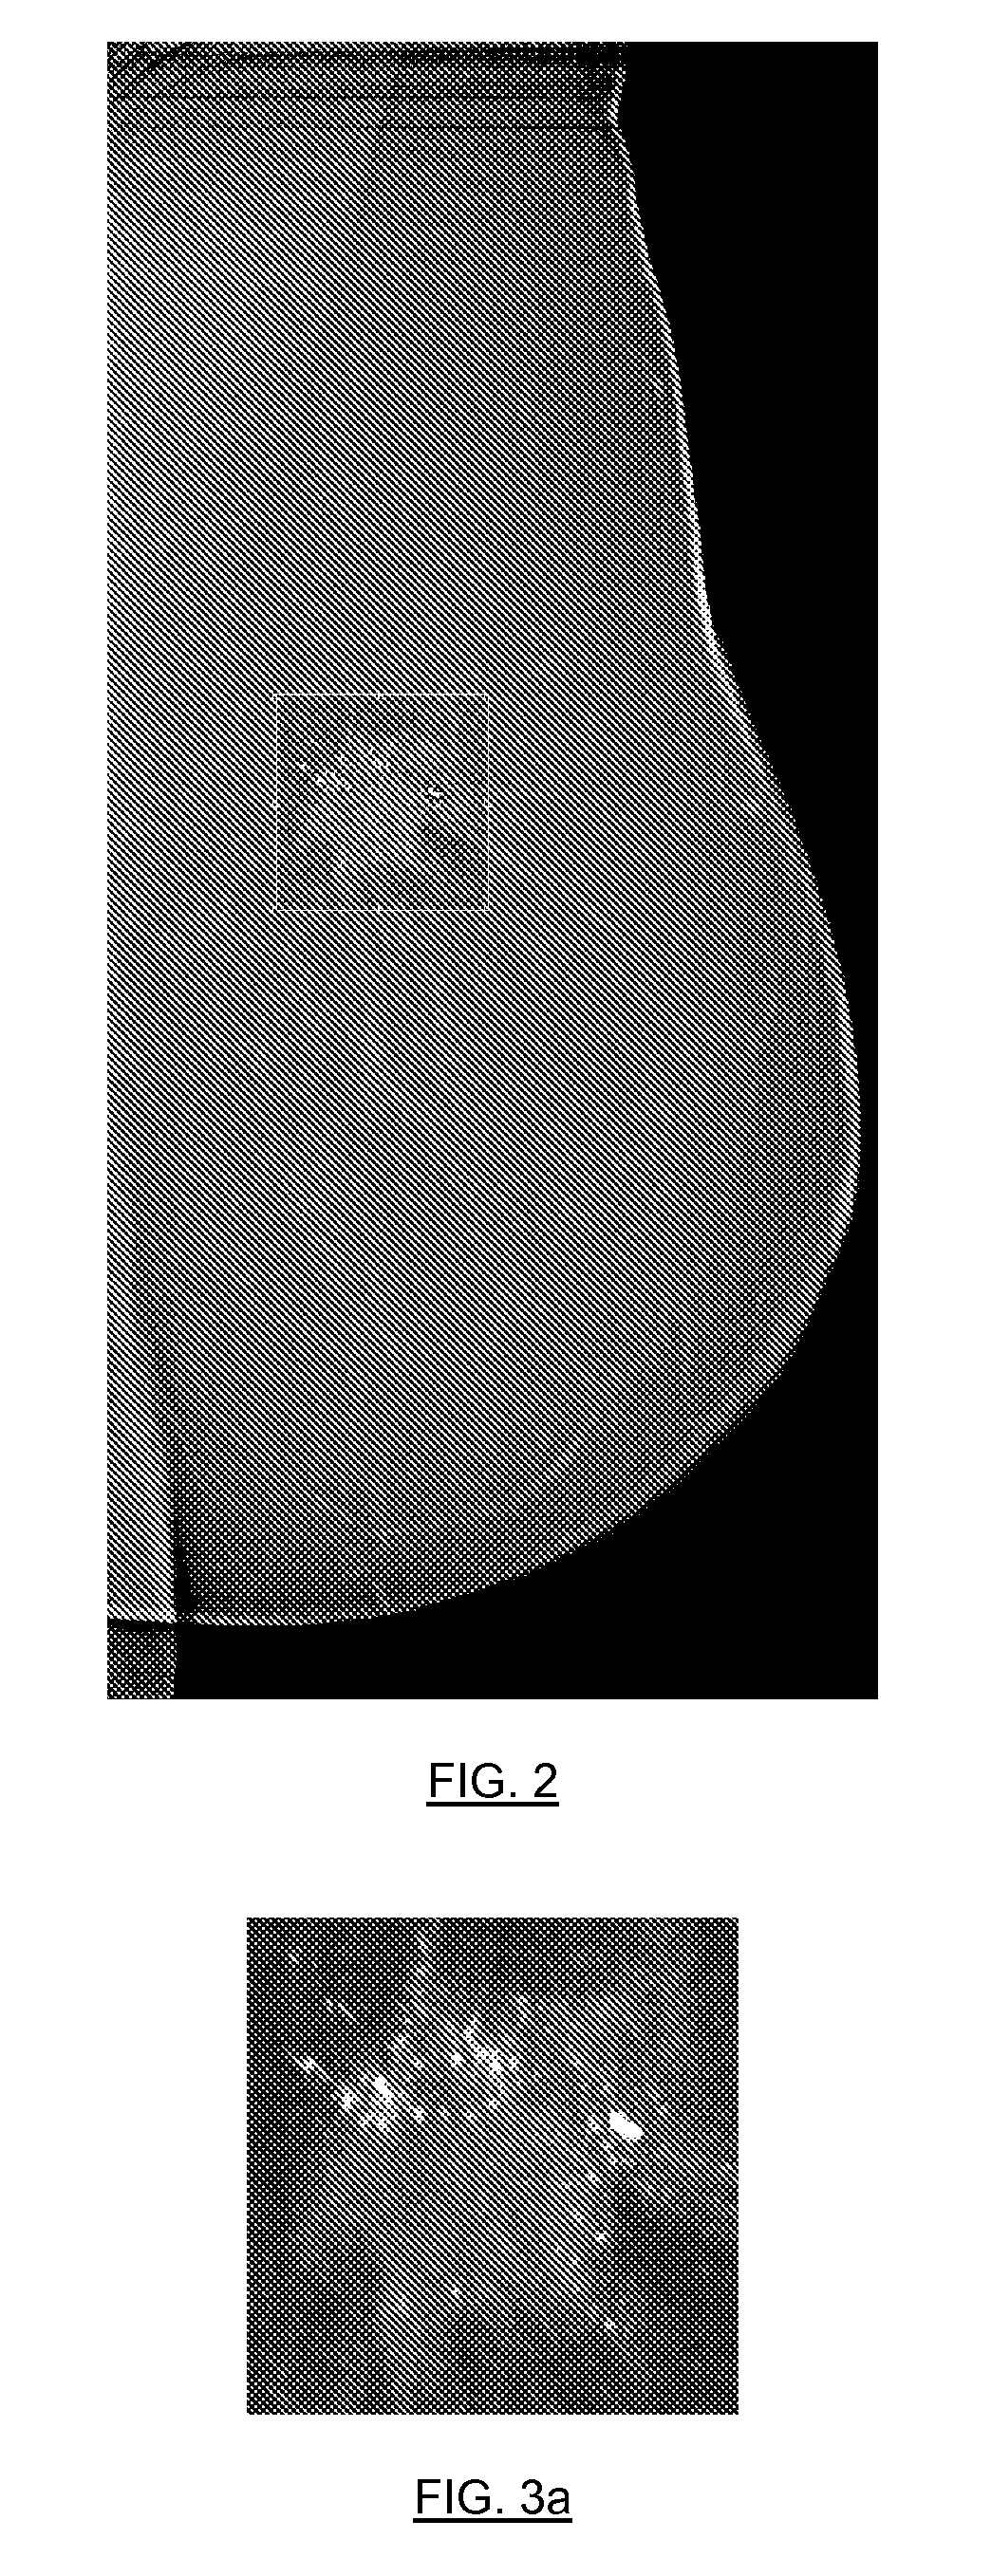 Method and system for displaying tomosynthesis images